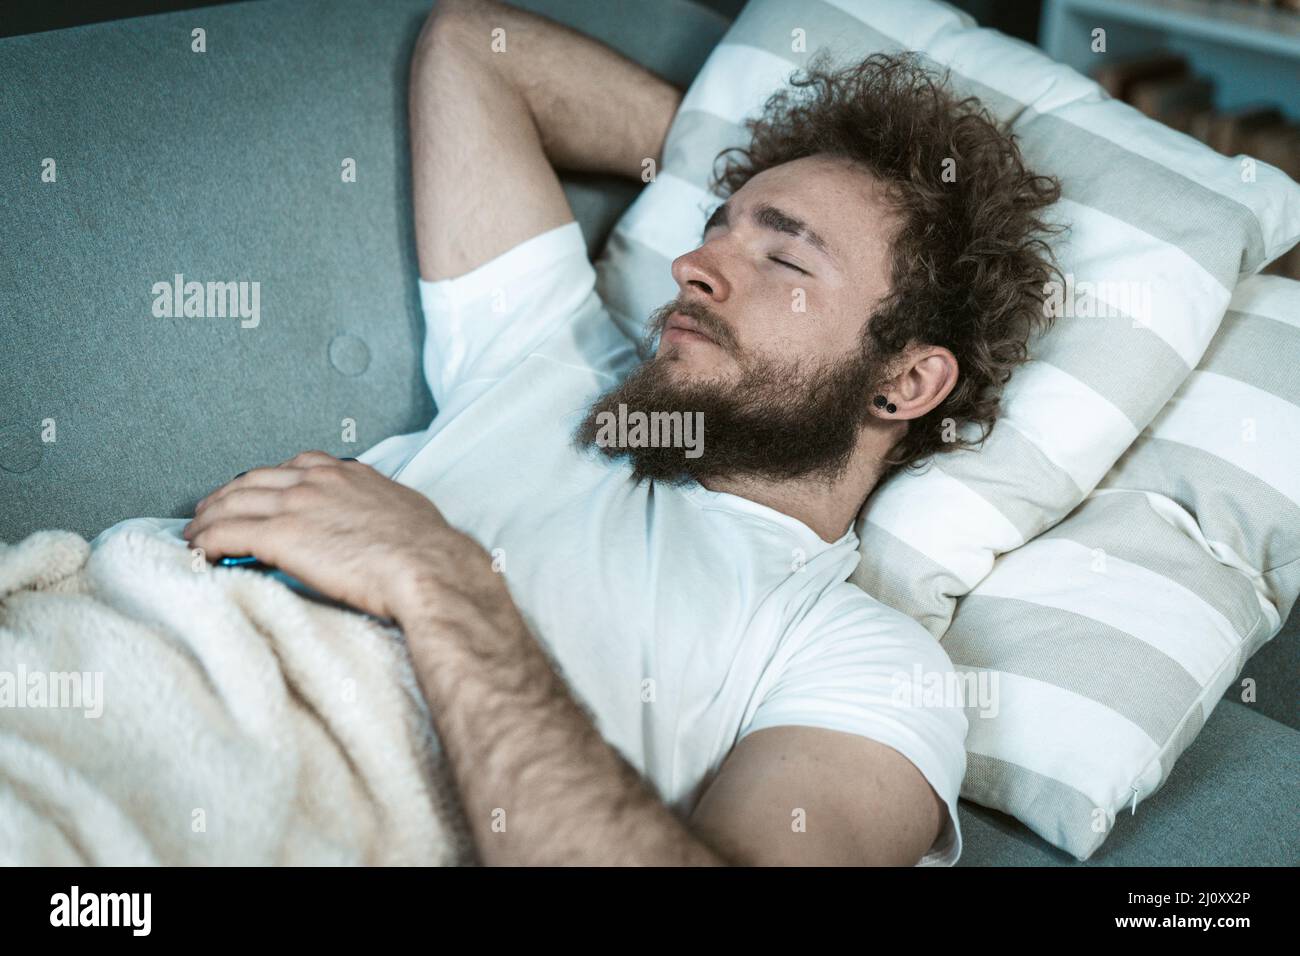 Relaxed sleeping handsome man with curly hair mid day resting on the couch or sofa enjoying weekend or quarantine days at home. Stock Photo